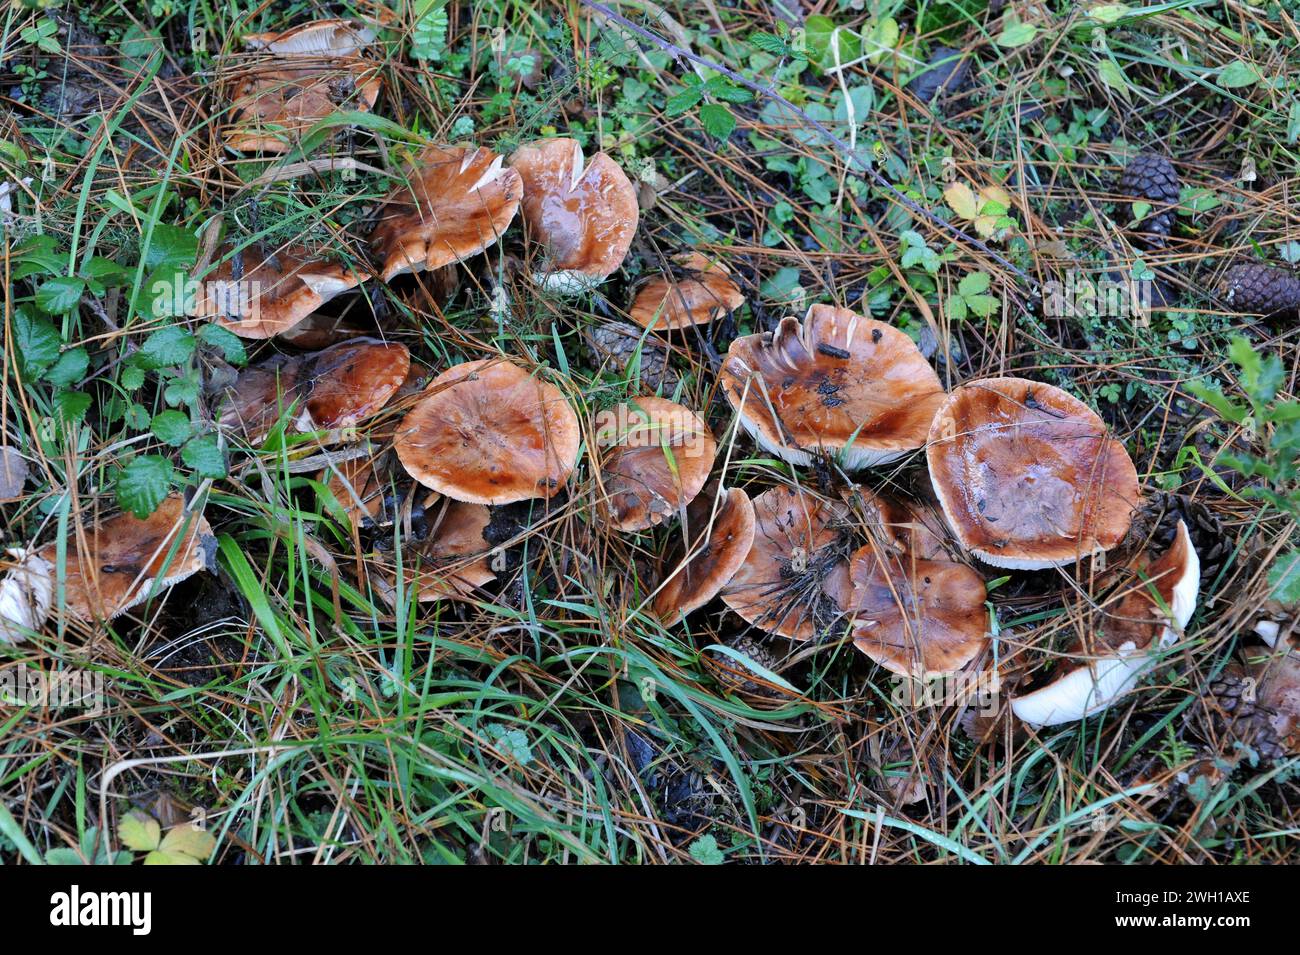 Booted knight fungus (Tricholoma focale) is an inapreciated edible mushroom. This photo was taken near Moia, Barcelona province, Catalonia, Spain. Stock Photo